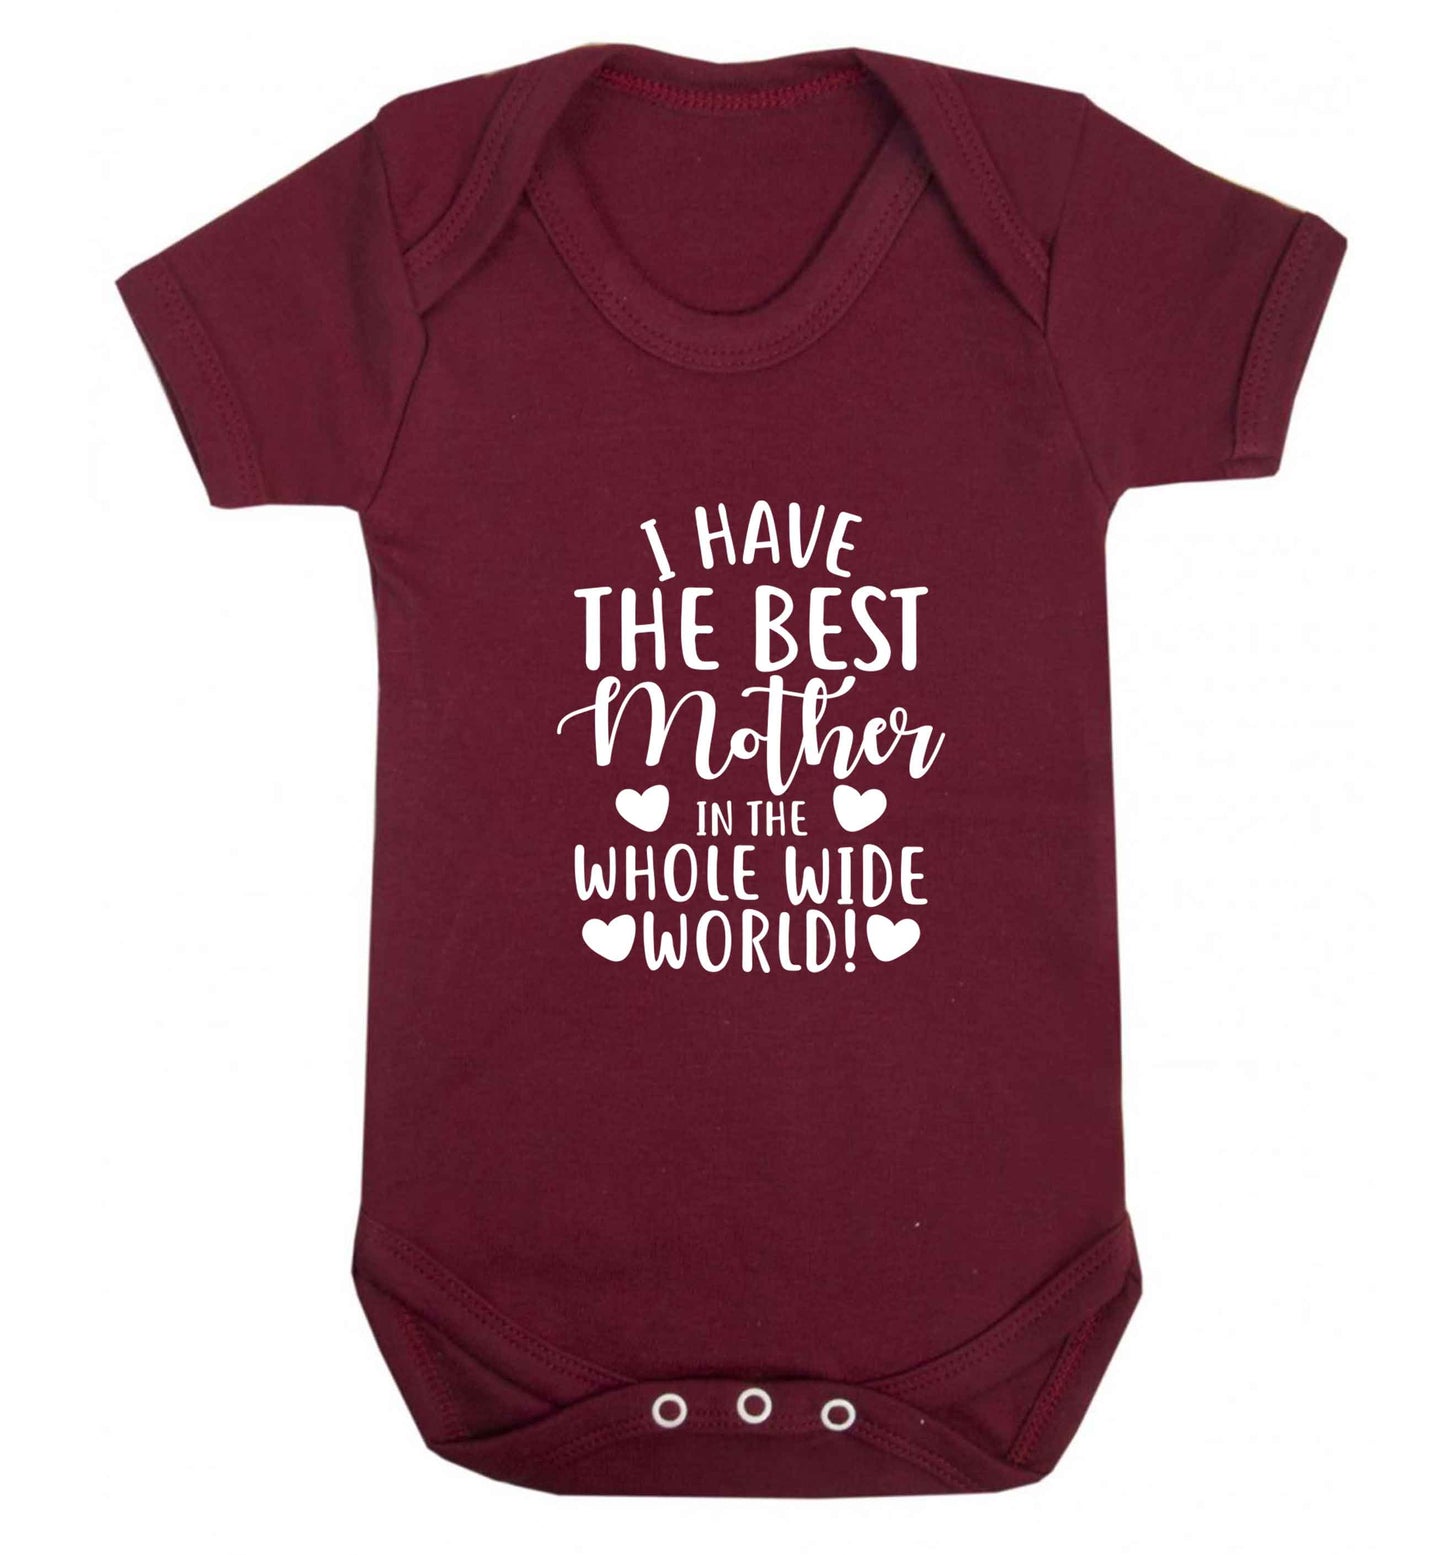 I have the best mother in the whole wide world baby vest maroon 18-24 months